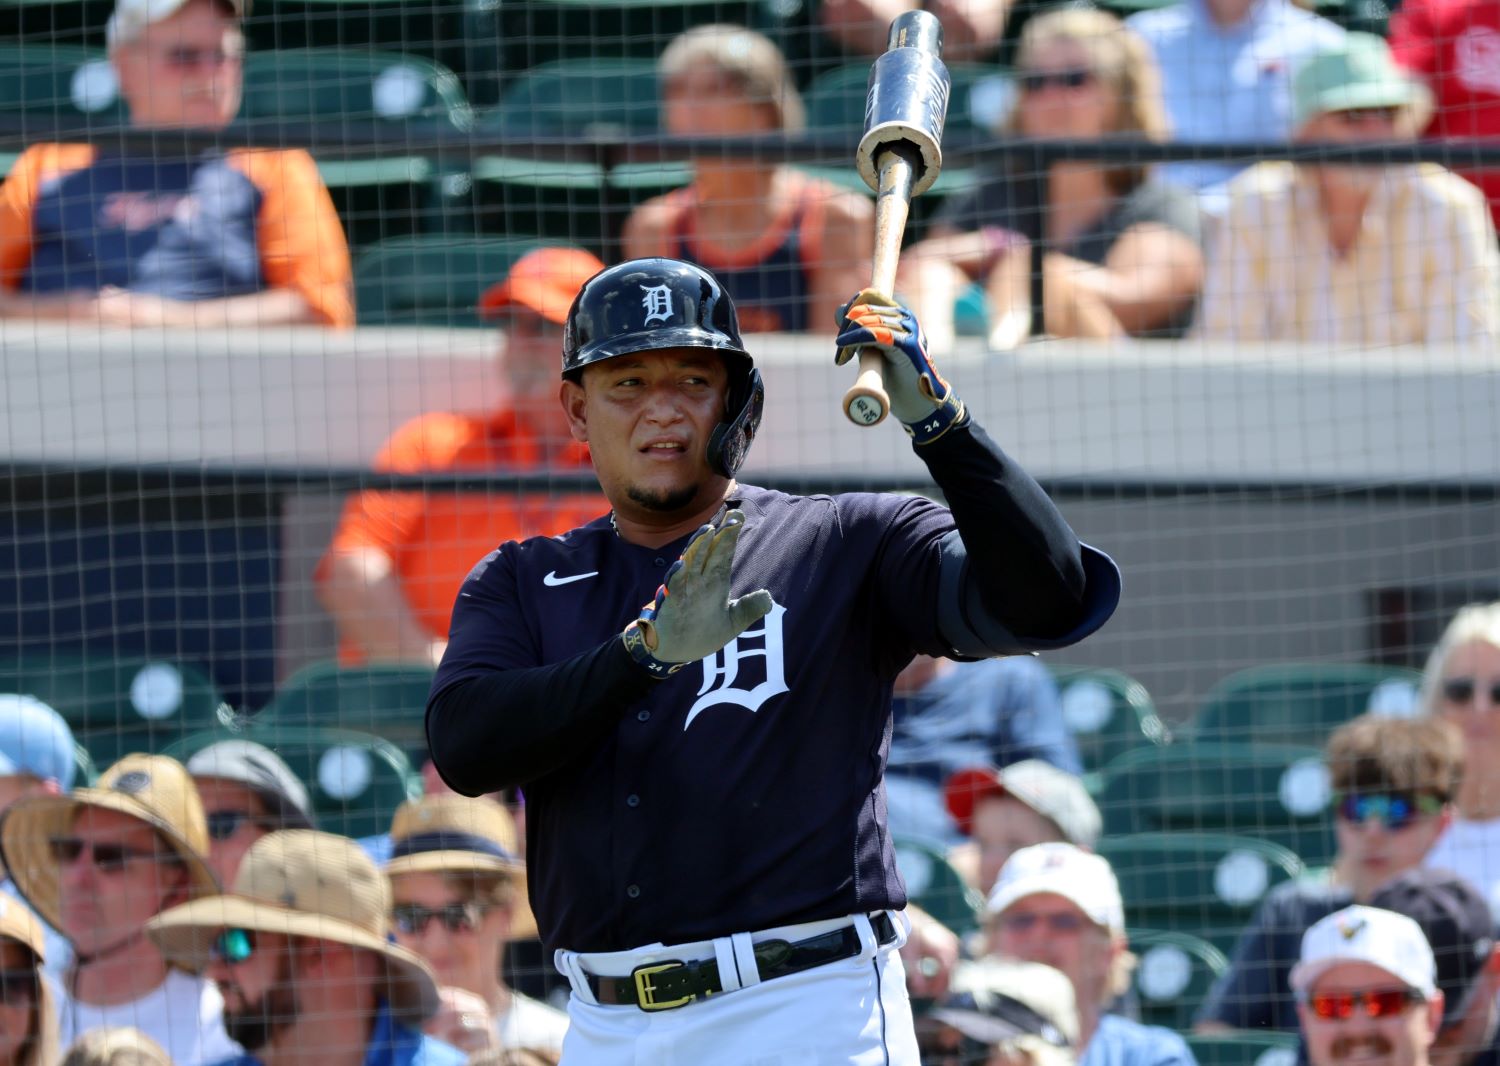 MLB fans tear into Detroit Tigers star for 'forgetting' he could